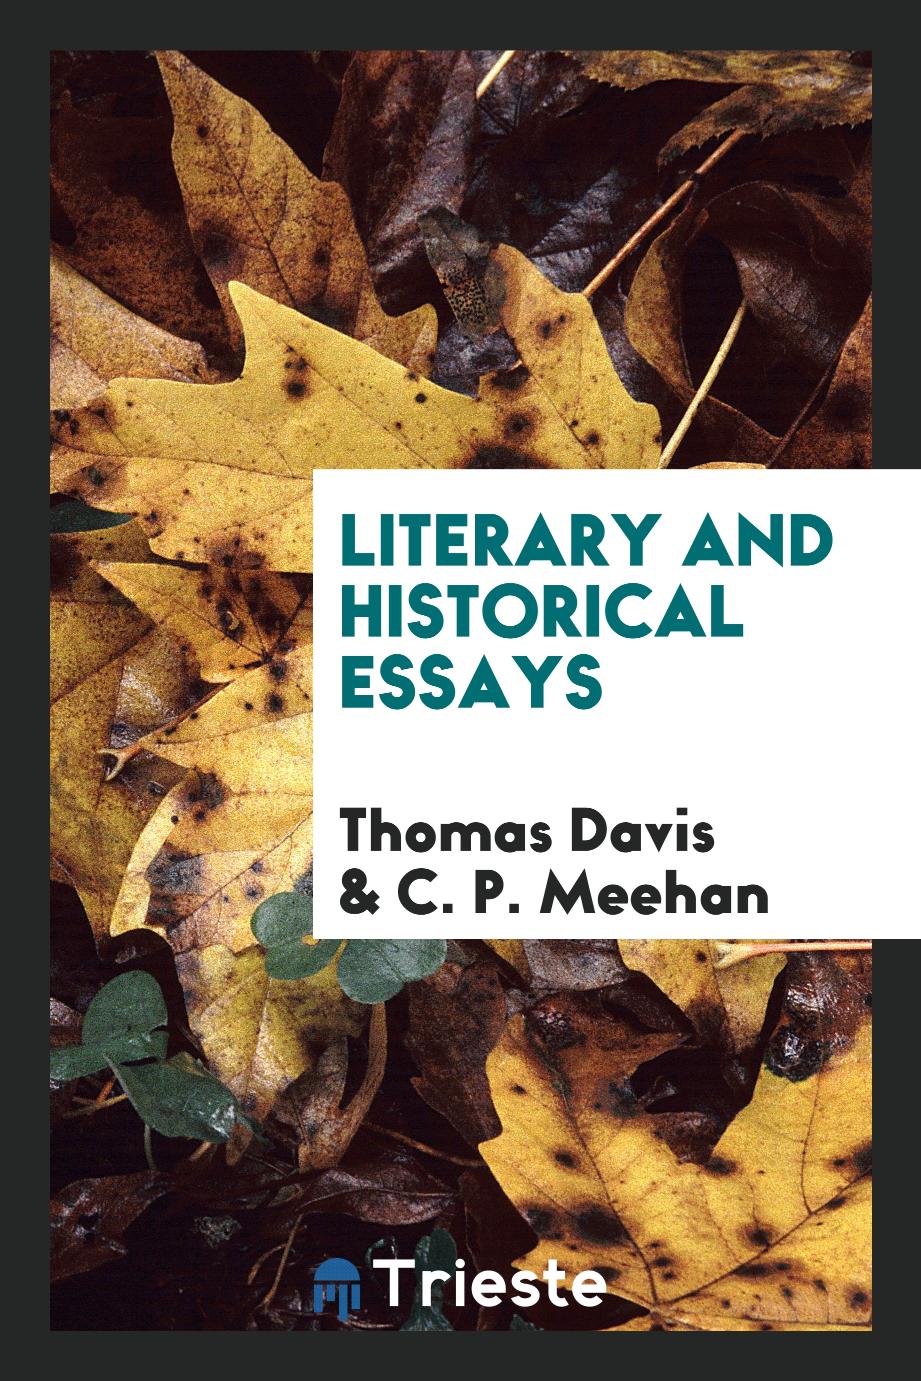 Literary and historical essays